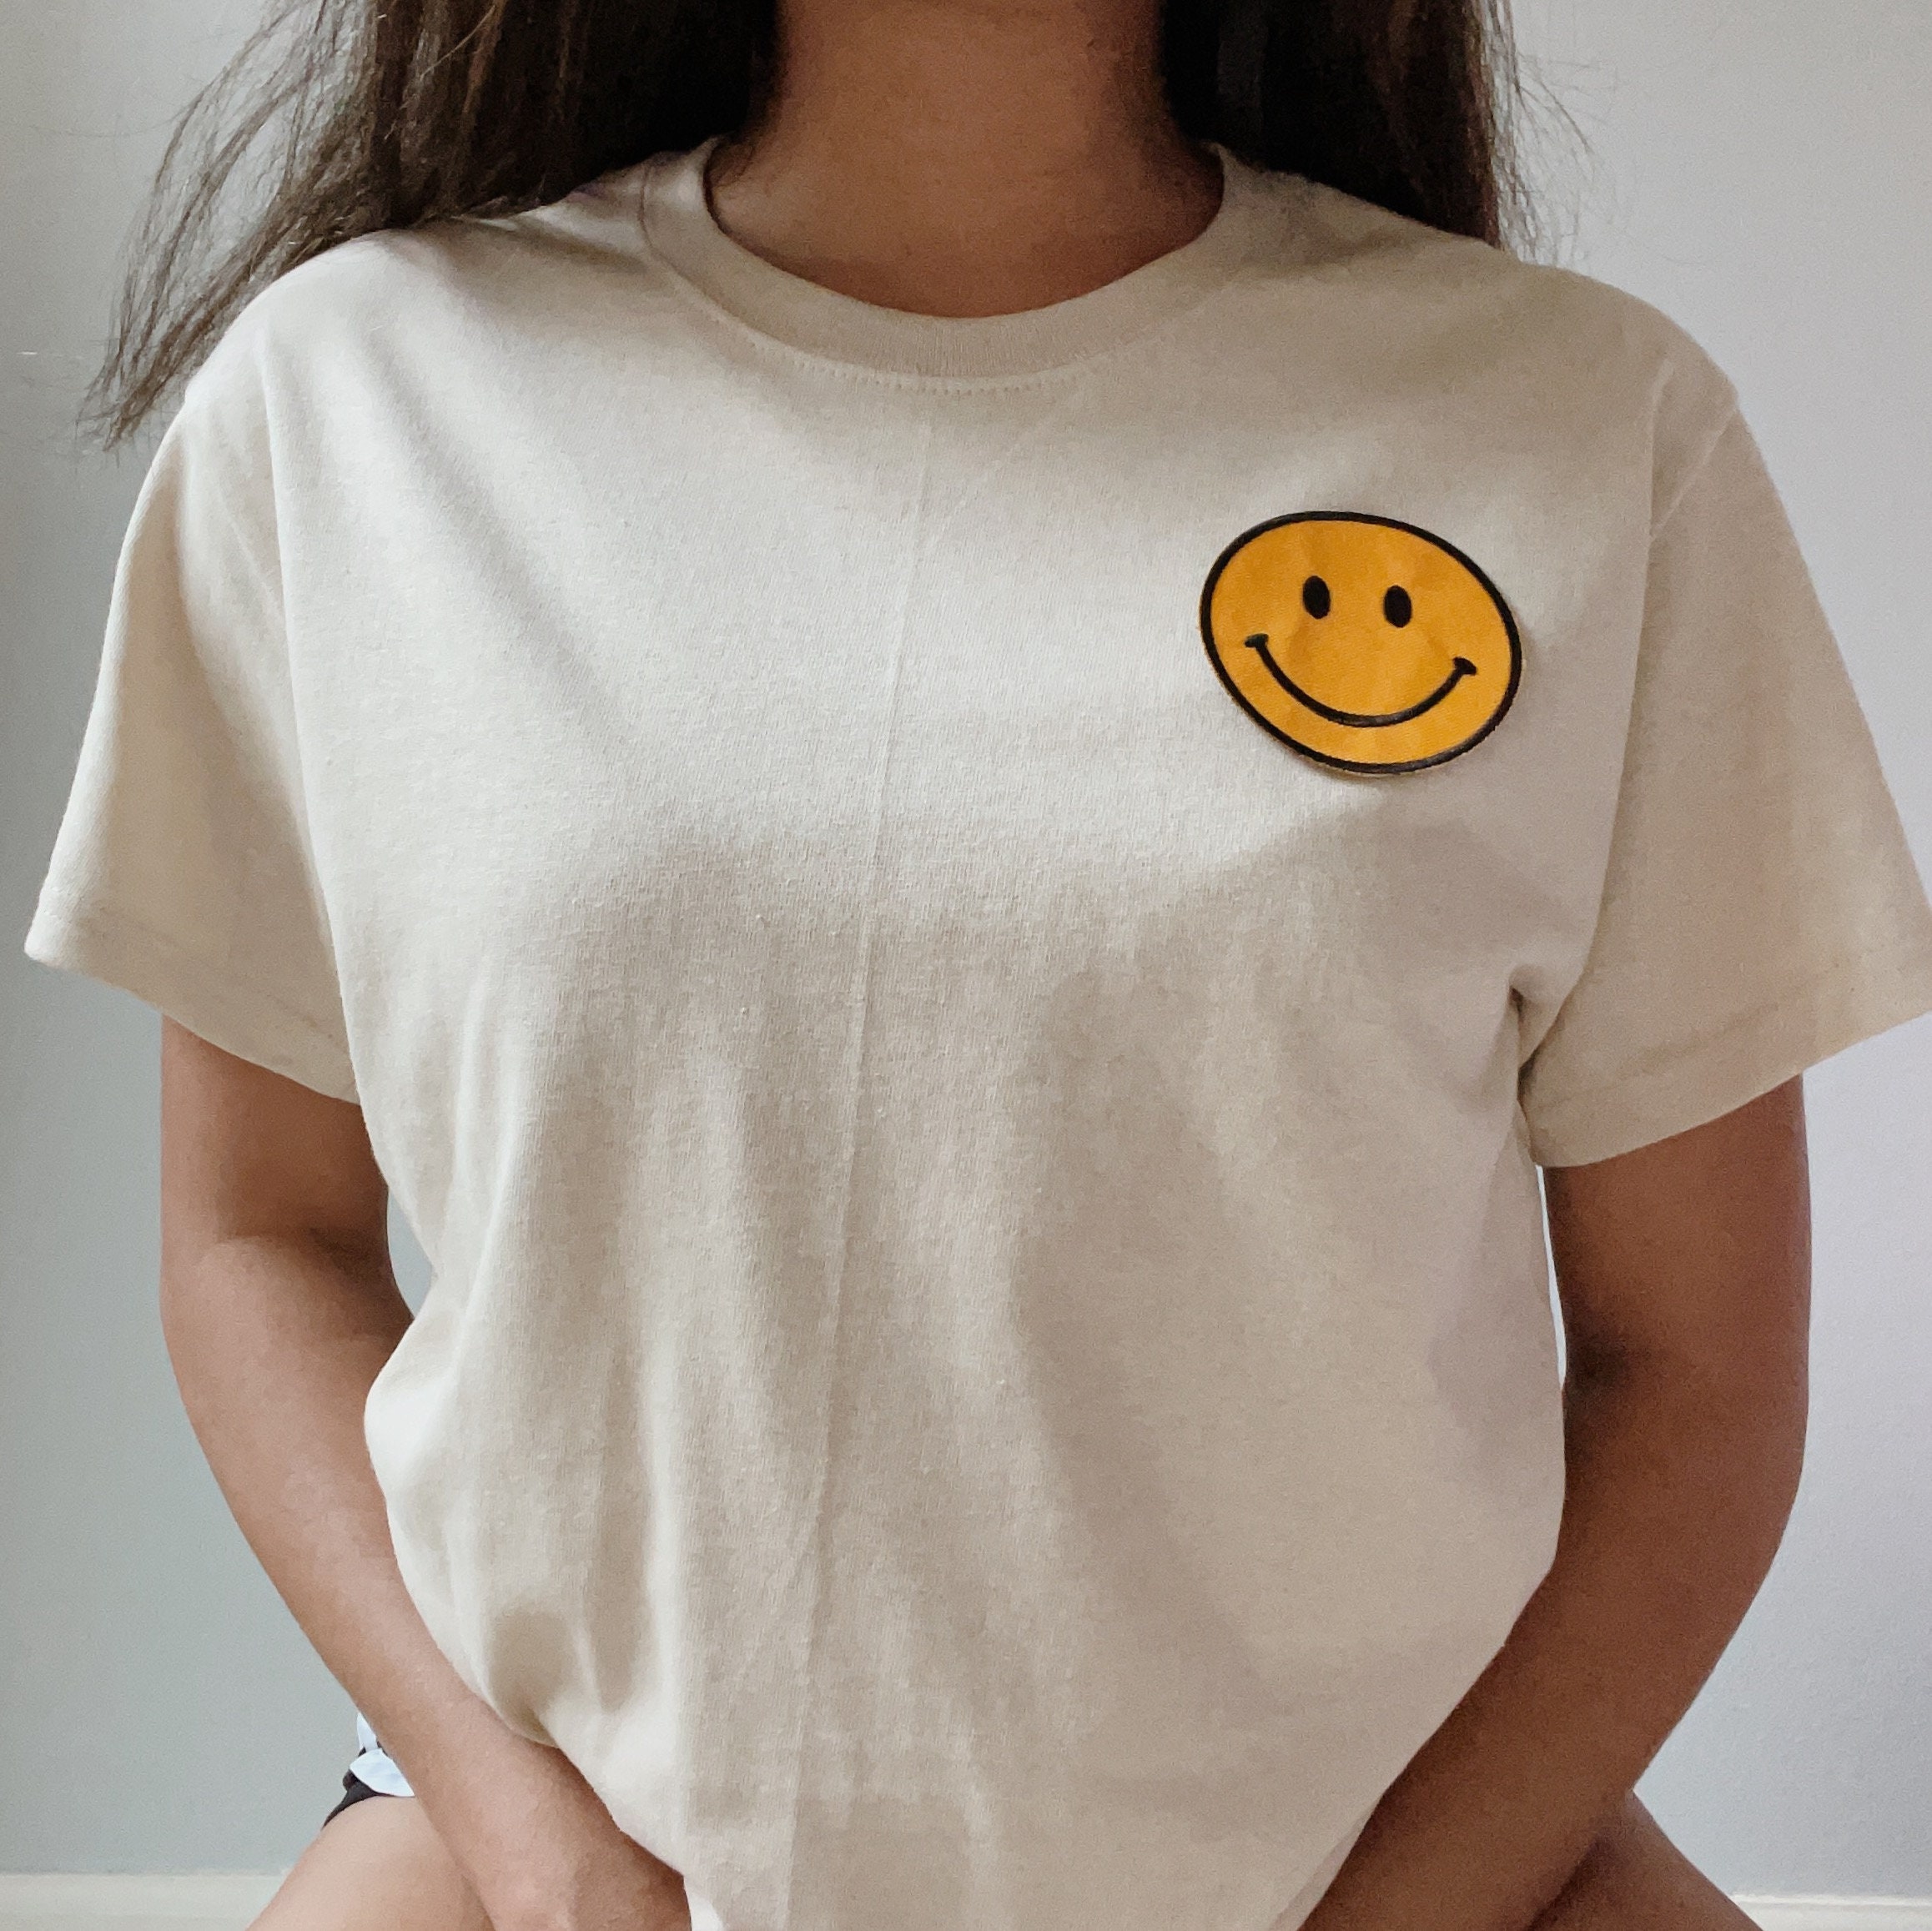 Smiley Face Shirt Smiley Face Tee Trendy Summer Tshirt - Etsy